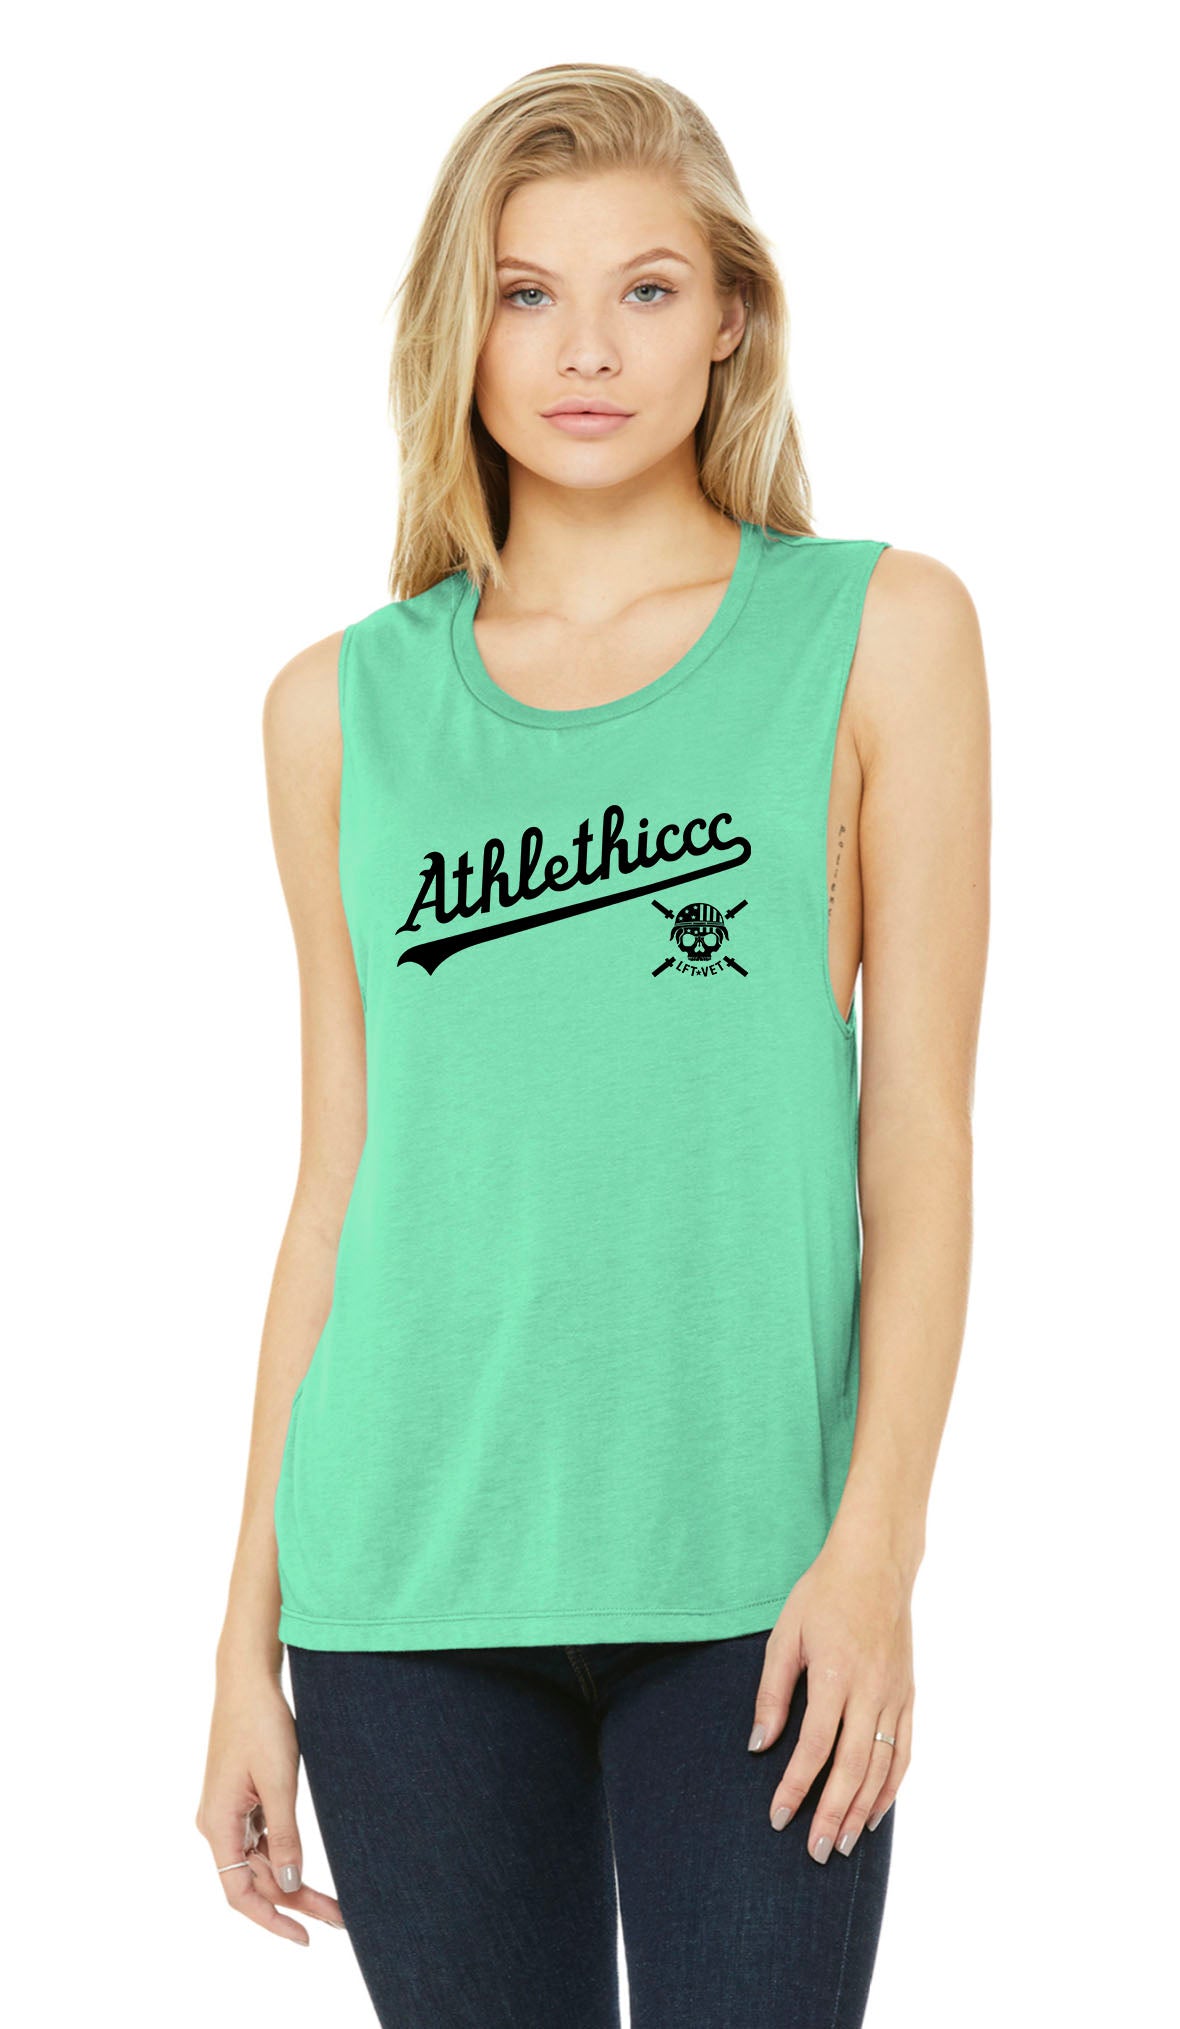 Athlethiccc Flowy Muscle Tank